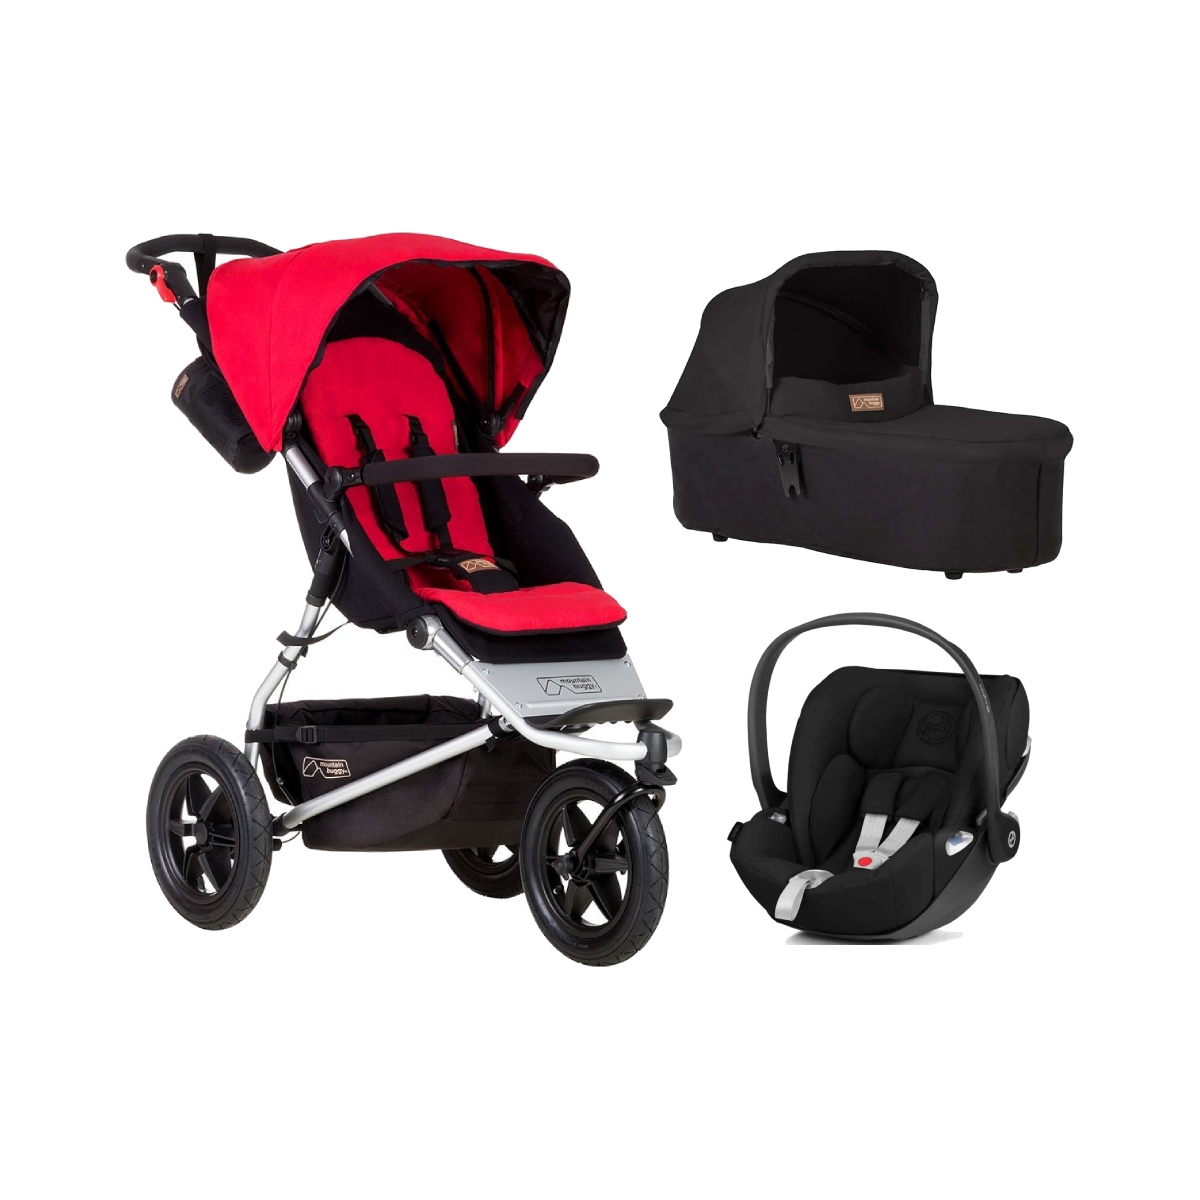 Mountain Buggy Urban Jungle Cloud Z Travel System